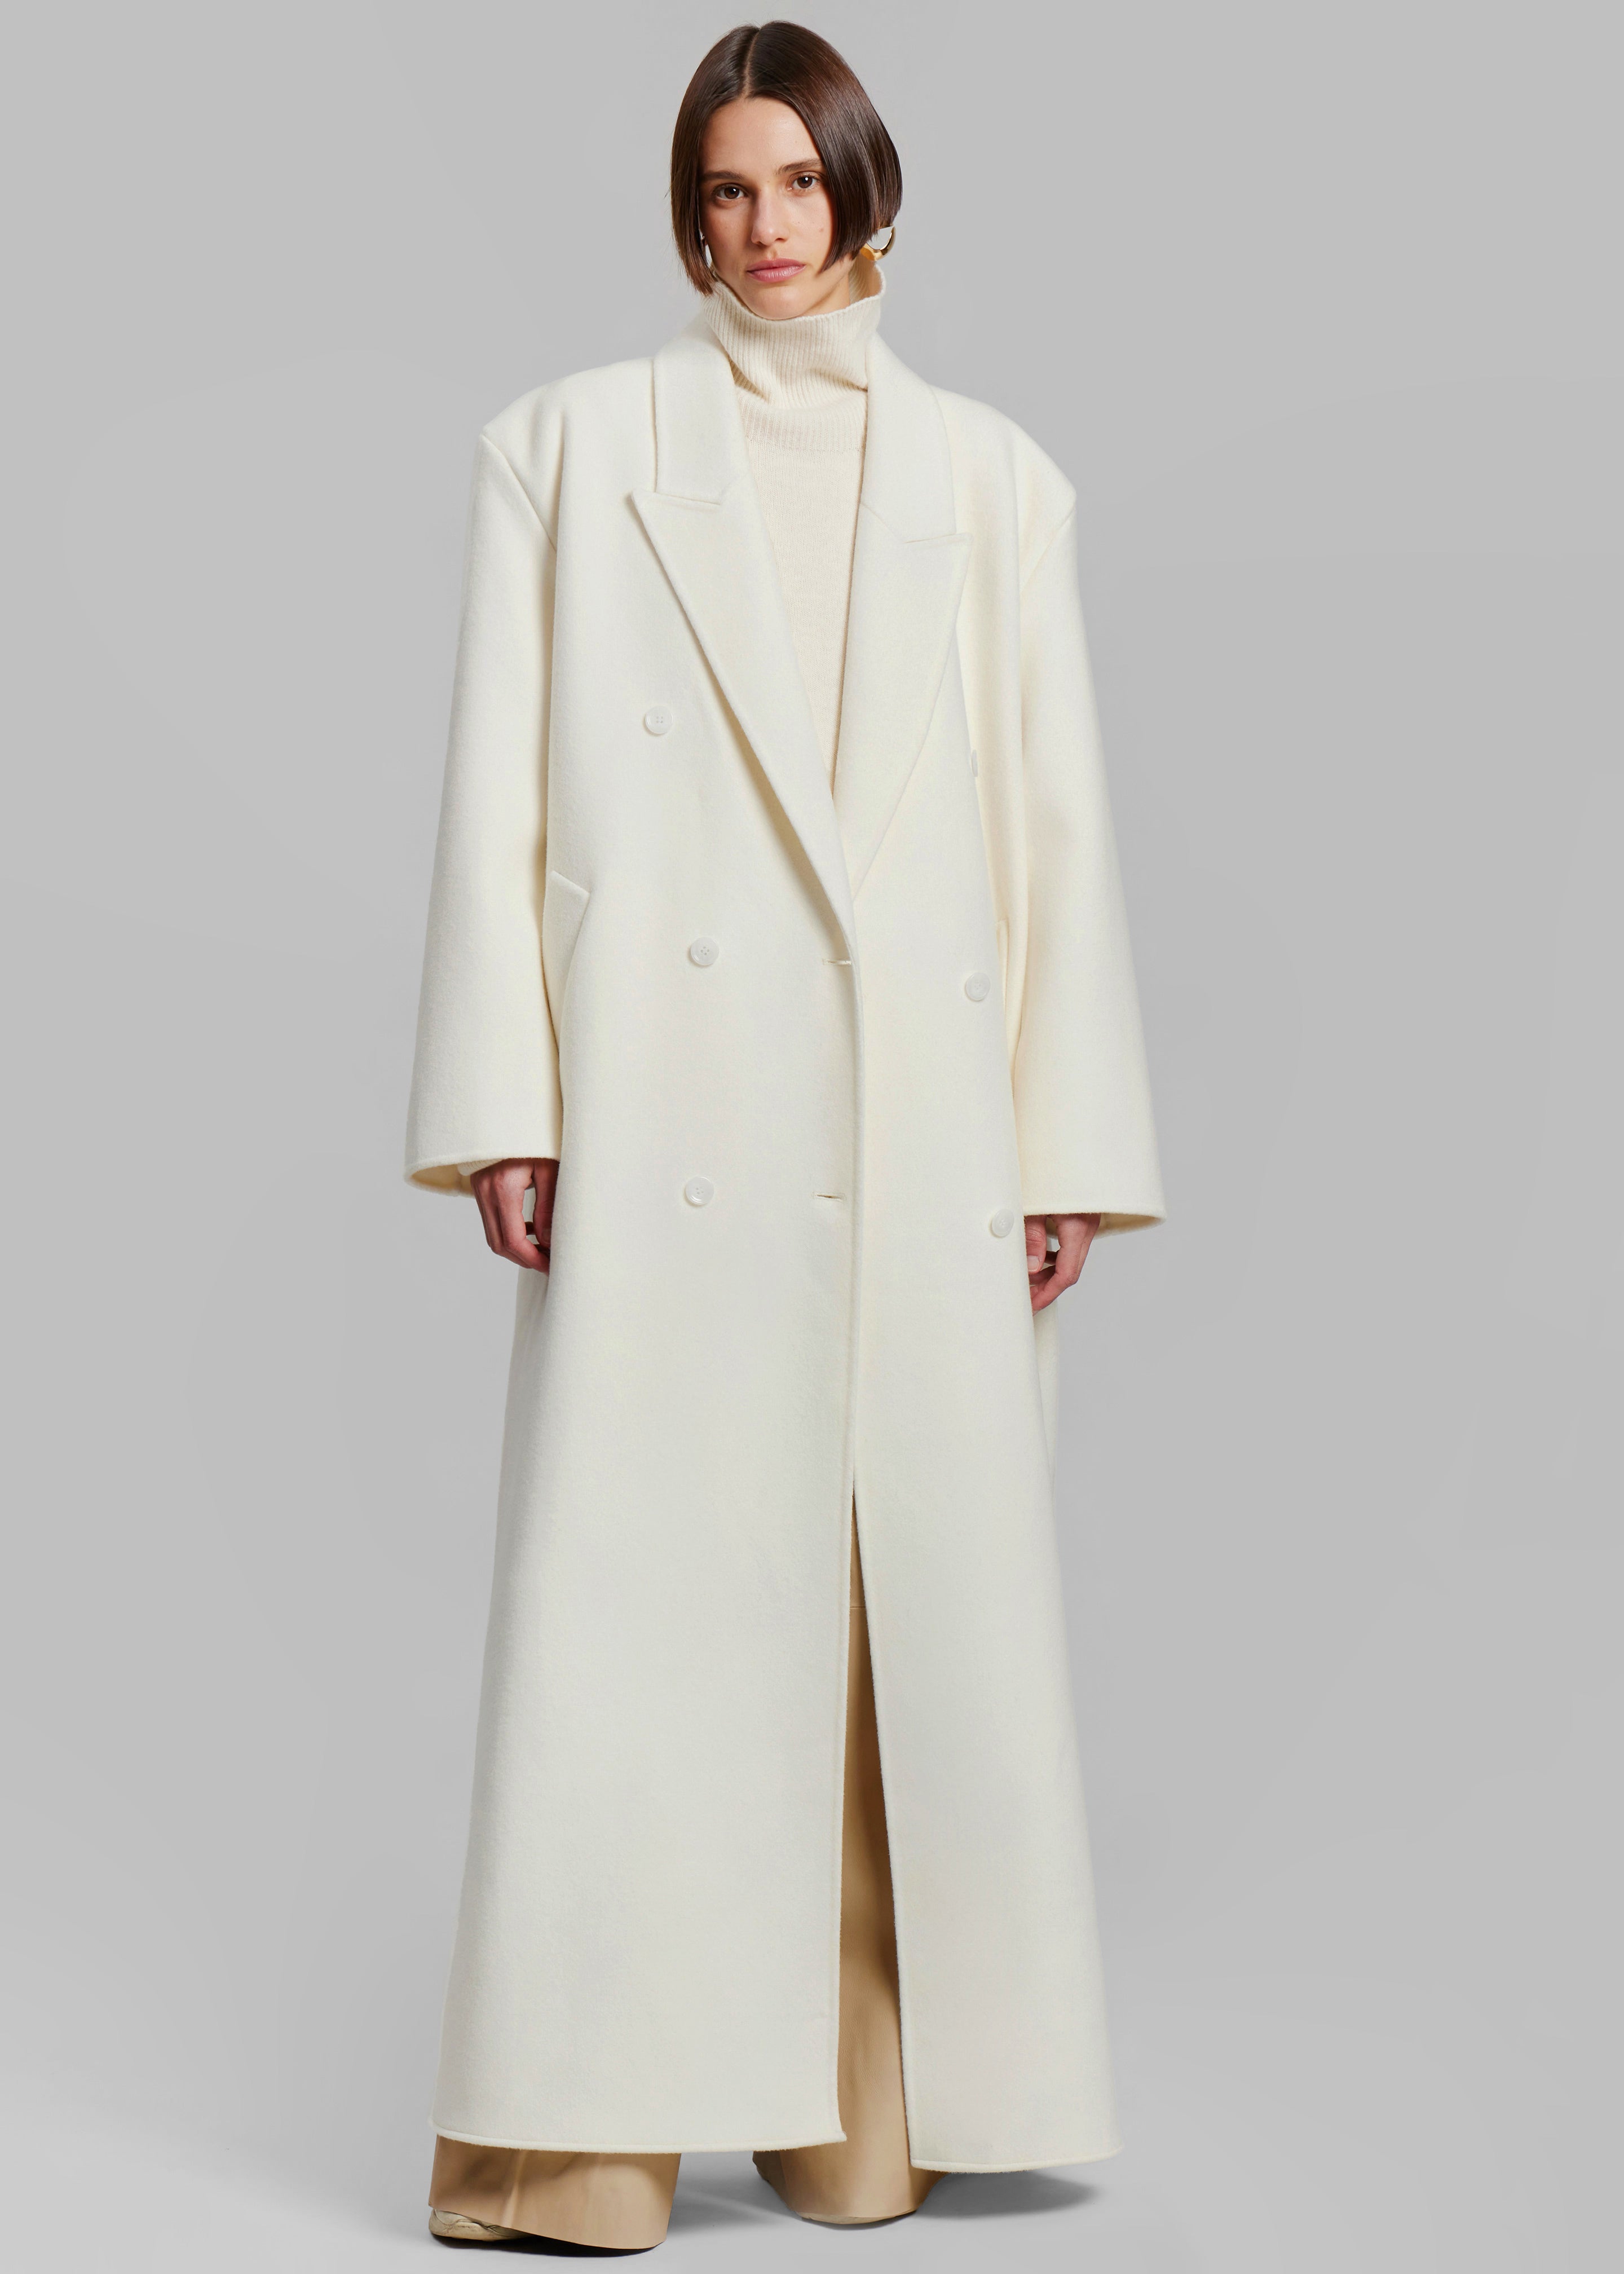 Gaia Double Breasted Coat - Ivory - 6